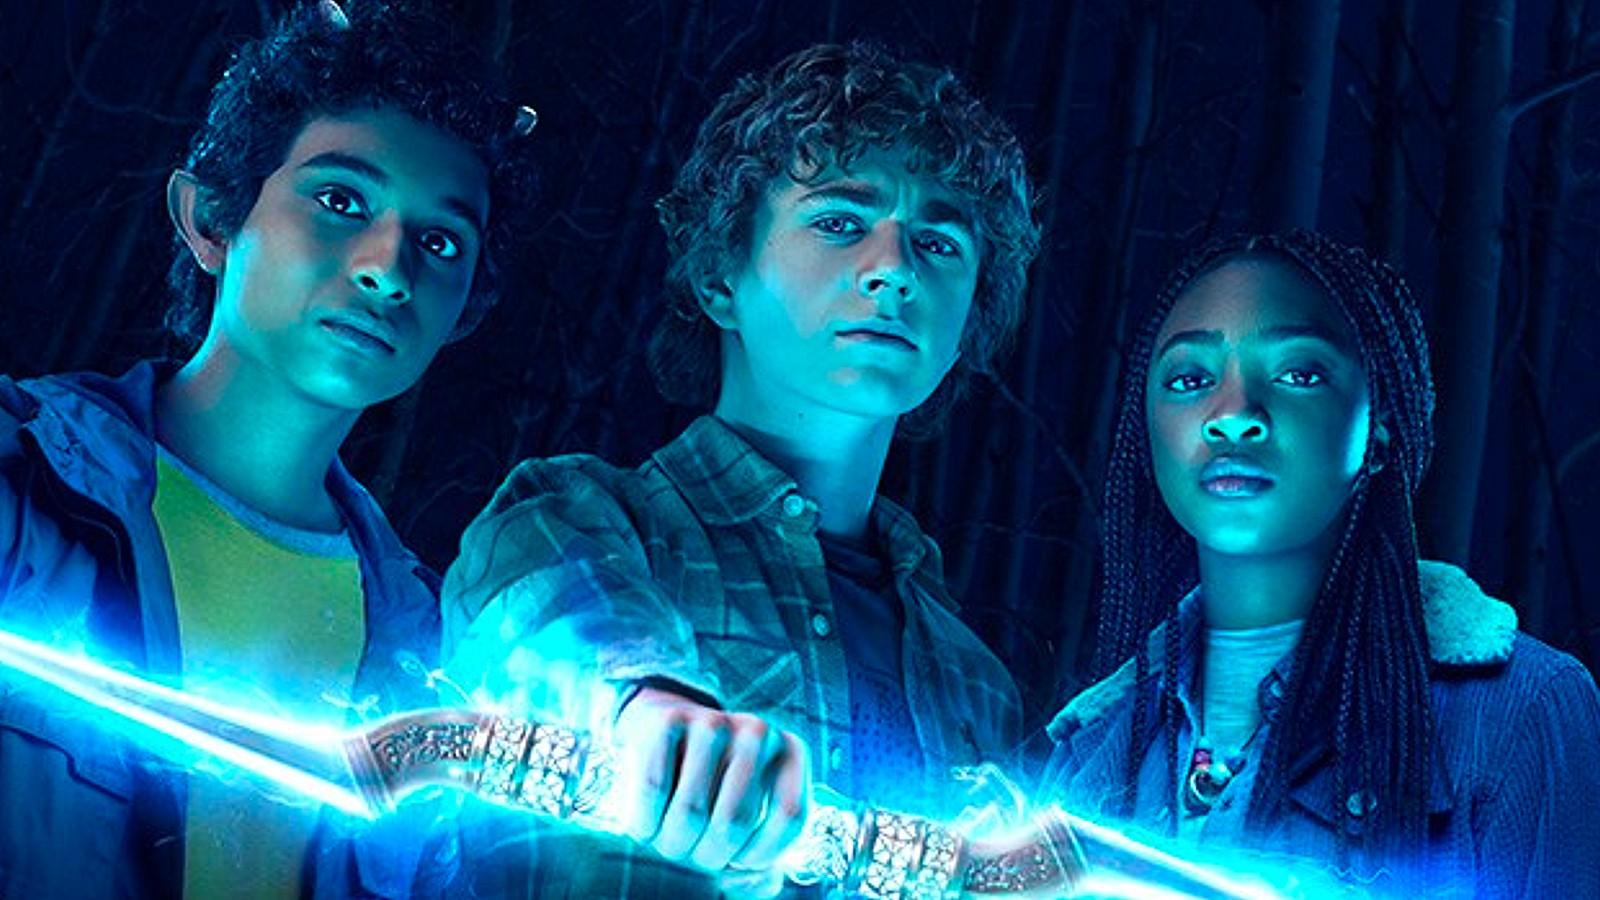 Oh the fans are about to be so mad': Percy Jackson Series Casting